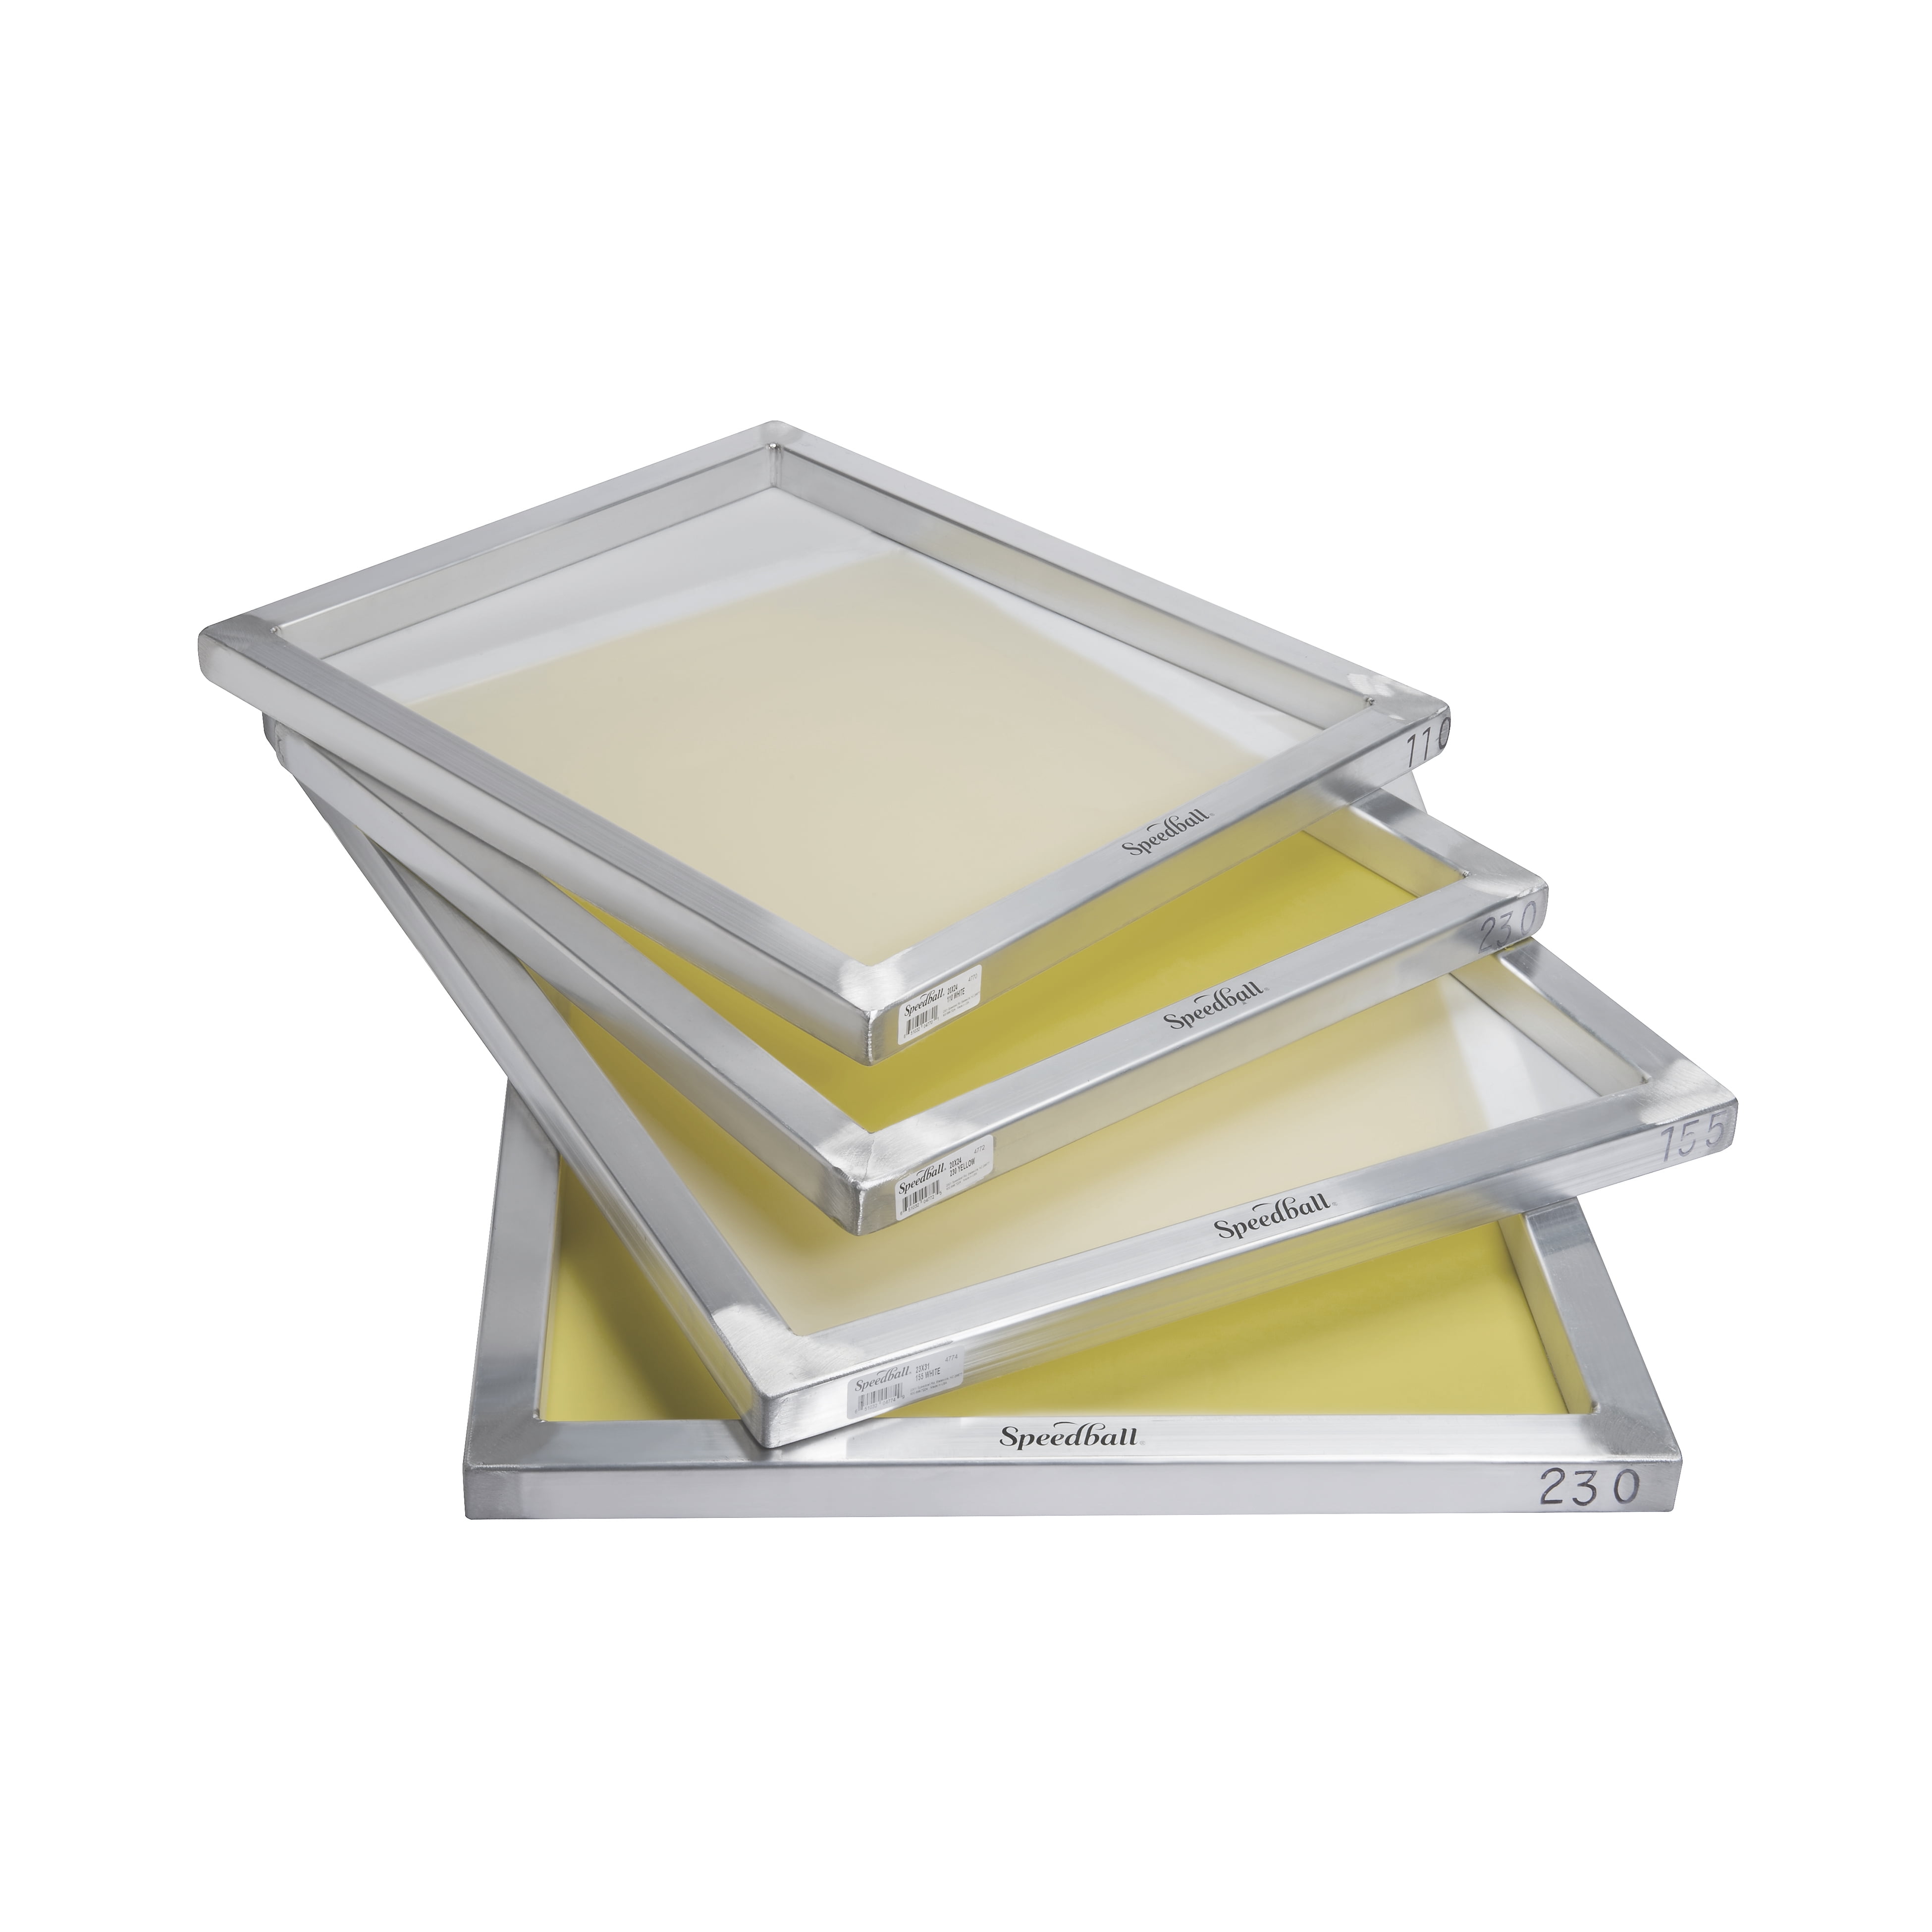 18" x 20"Aluminum Screen Printing Screens With 230 Yellow mesh count 2 Pack 